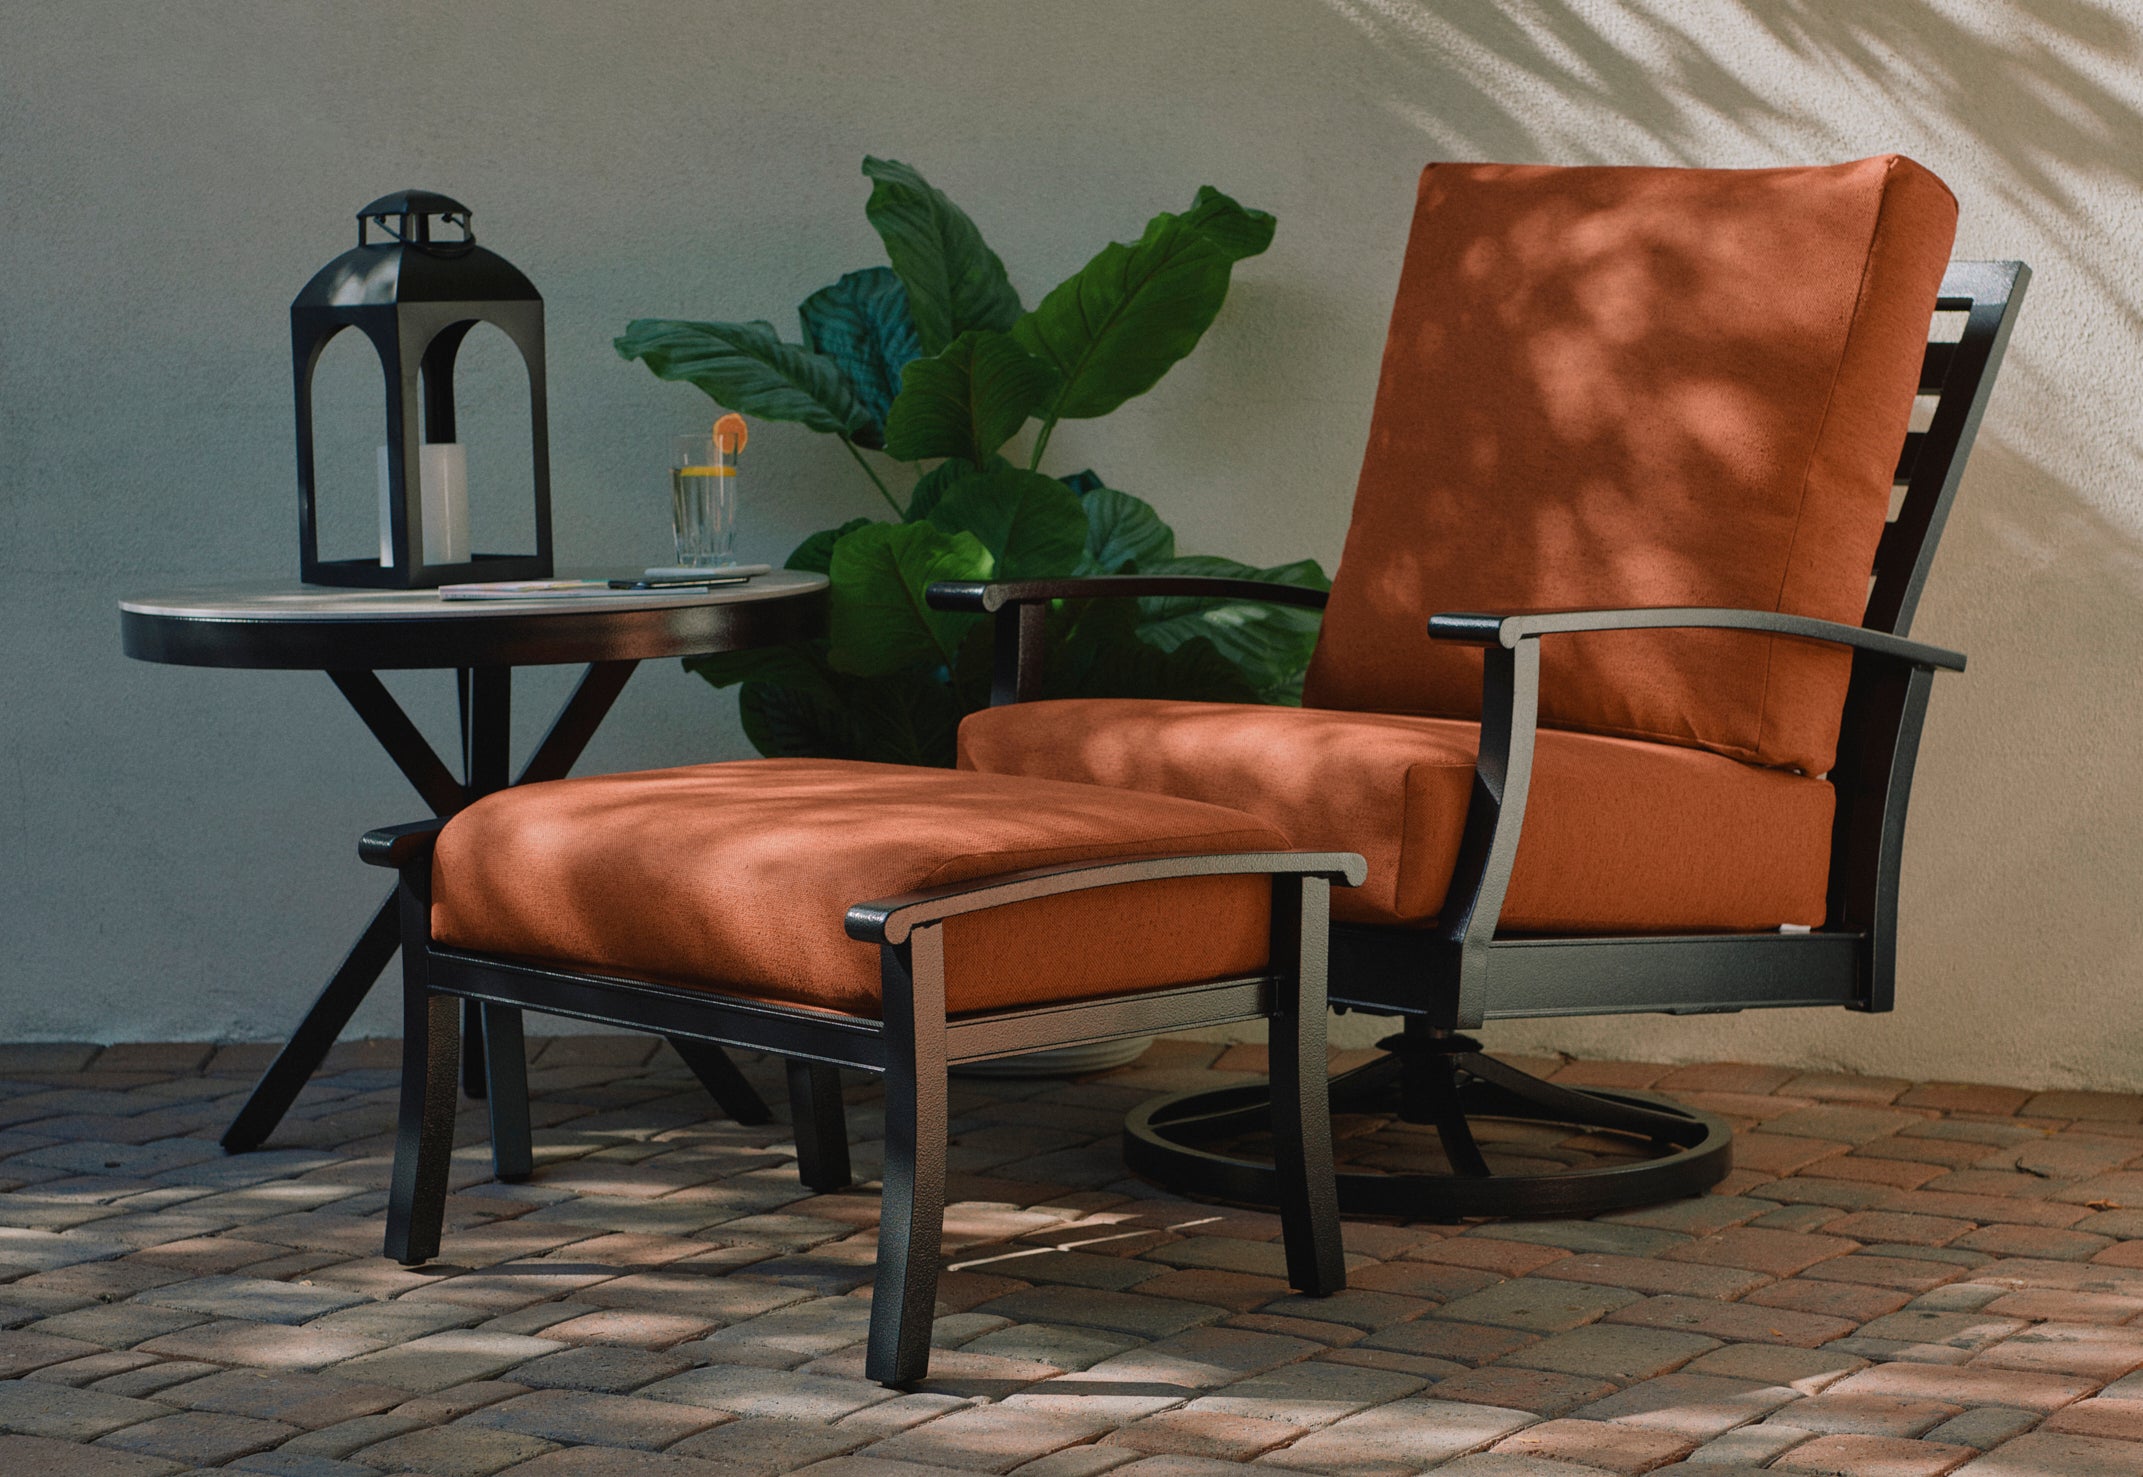 Paddy O’ Furniture’s Newport High Back swivel rocker and ottoman with Sunset Bliss Cushions.